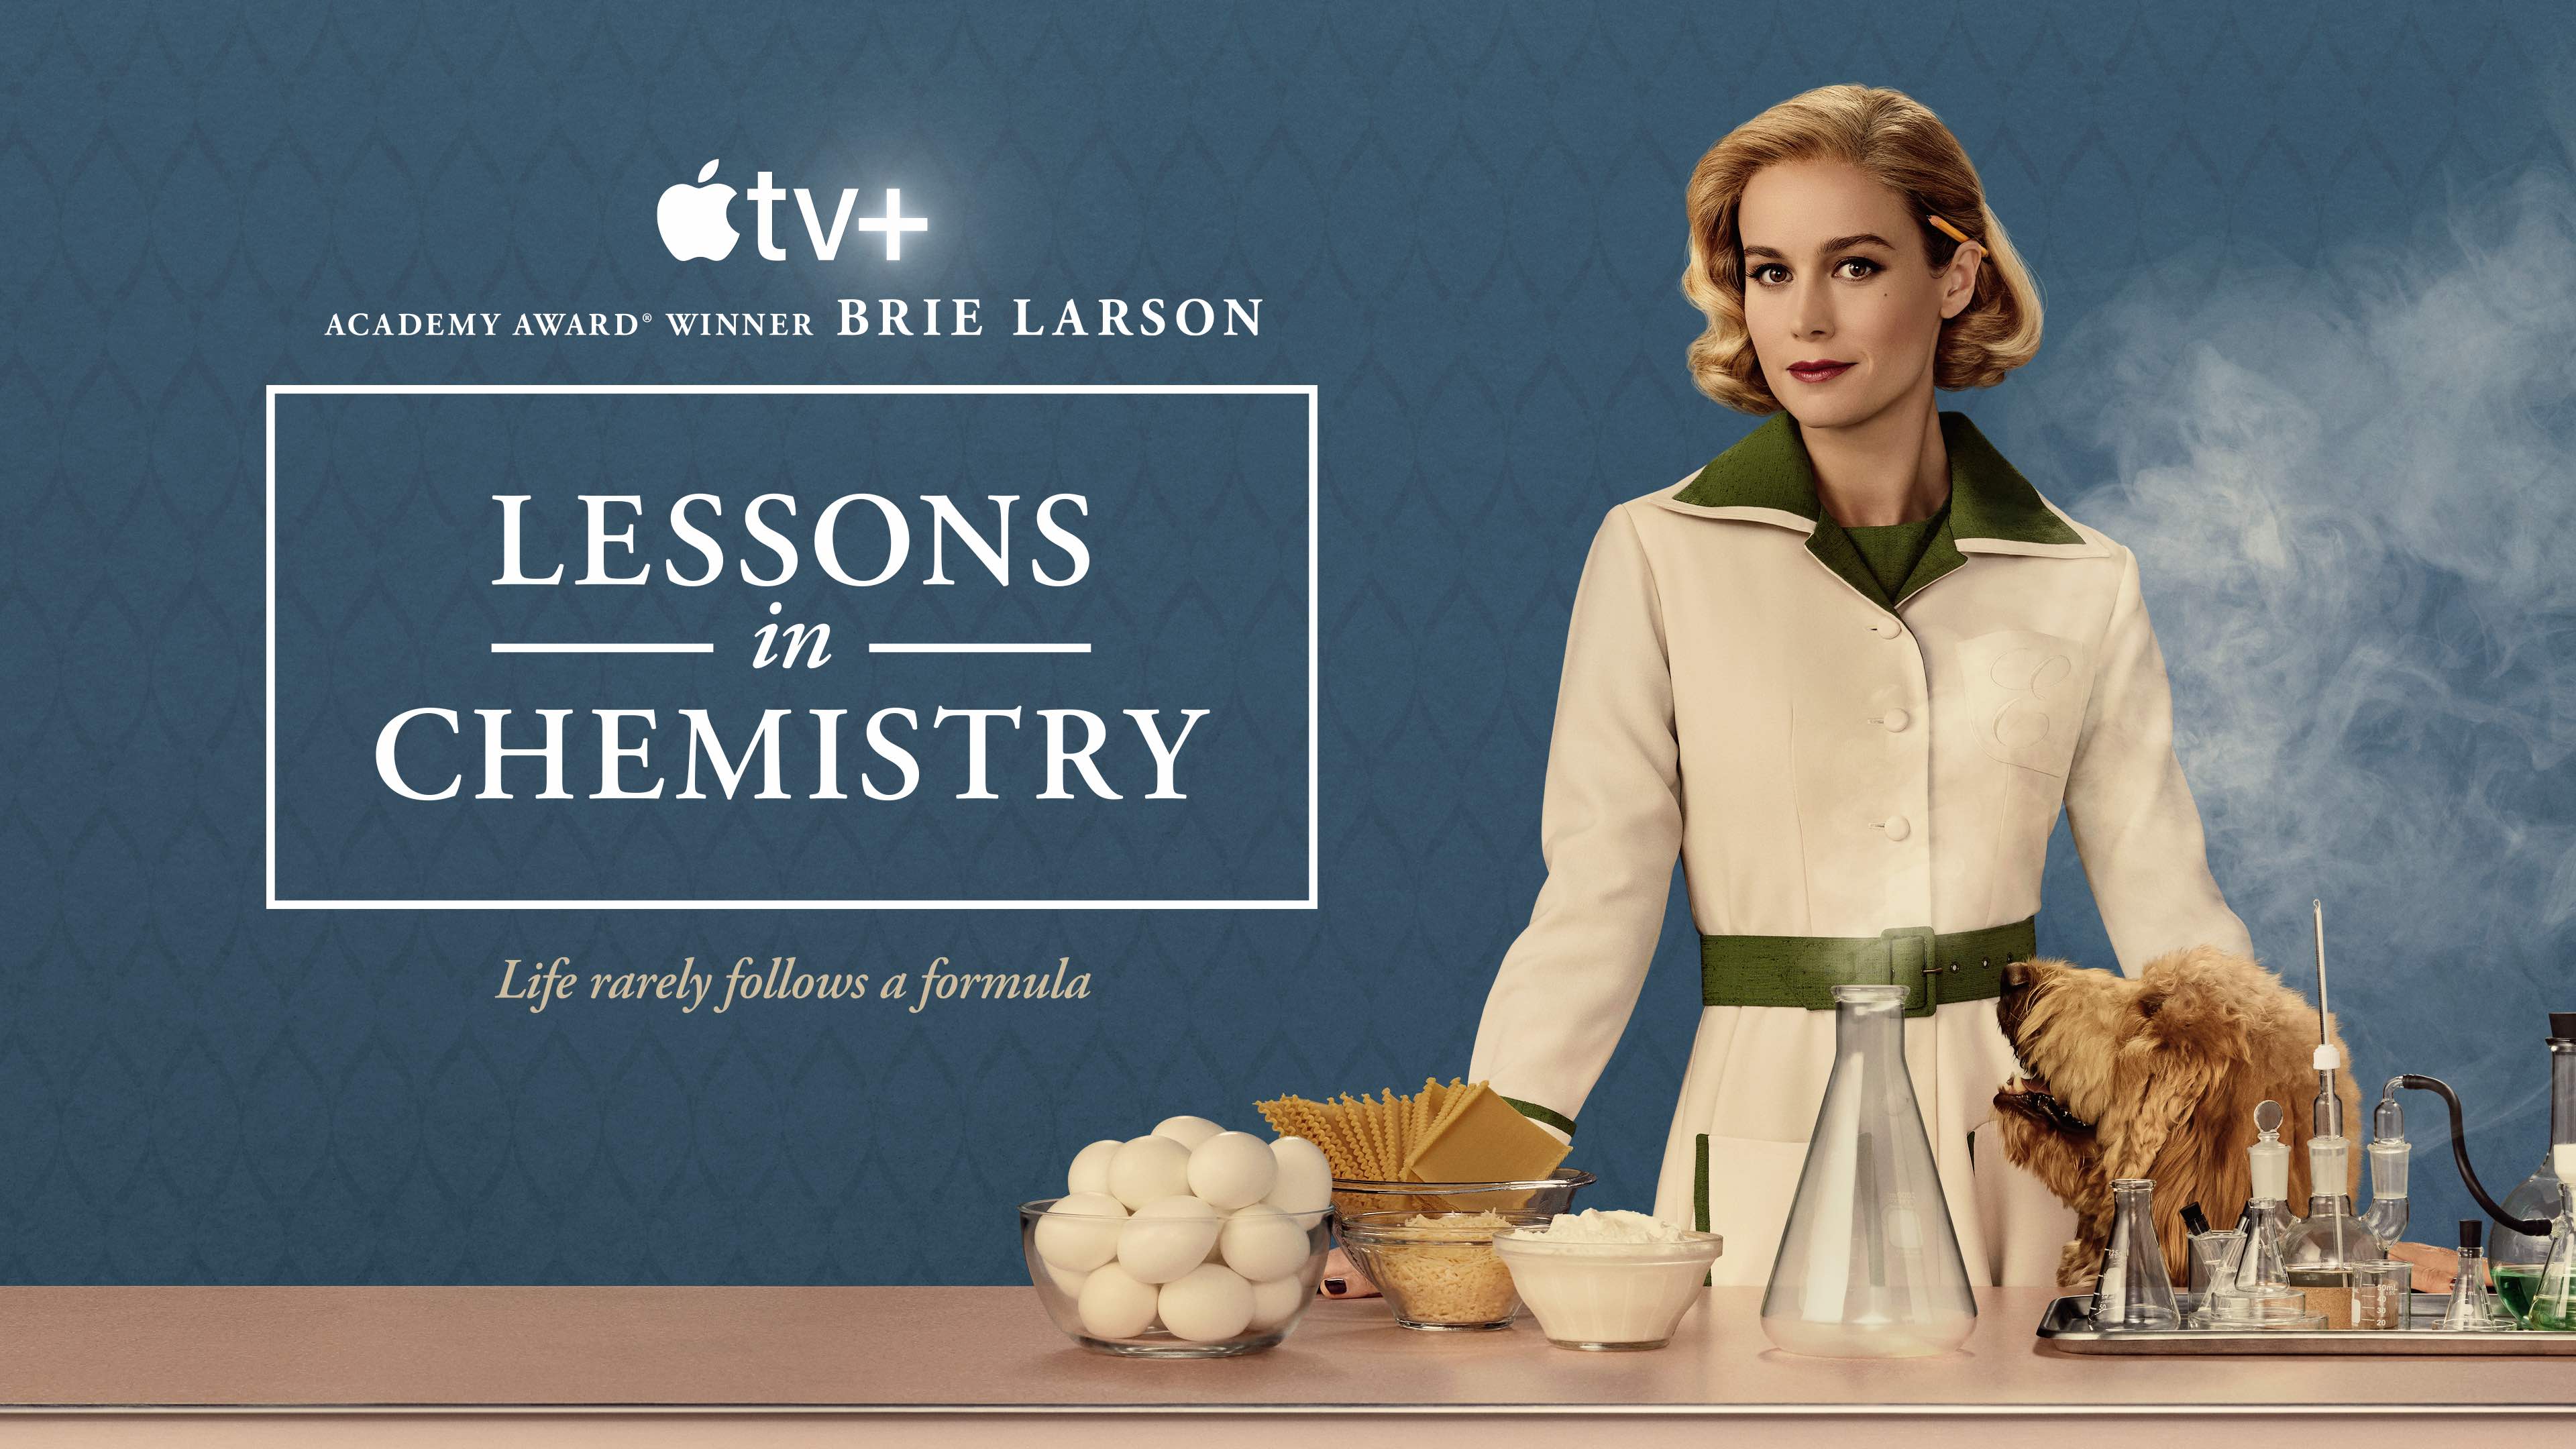 Lessons in Chemistry Cast - Every Actor and Character in the Apple TV+ Series